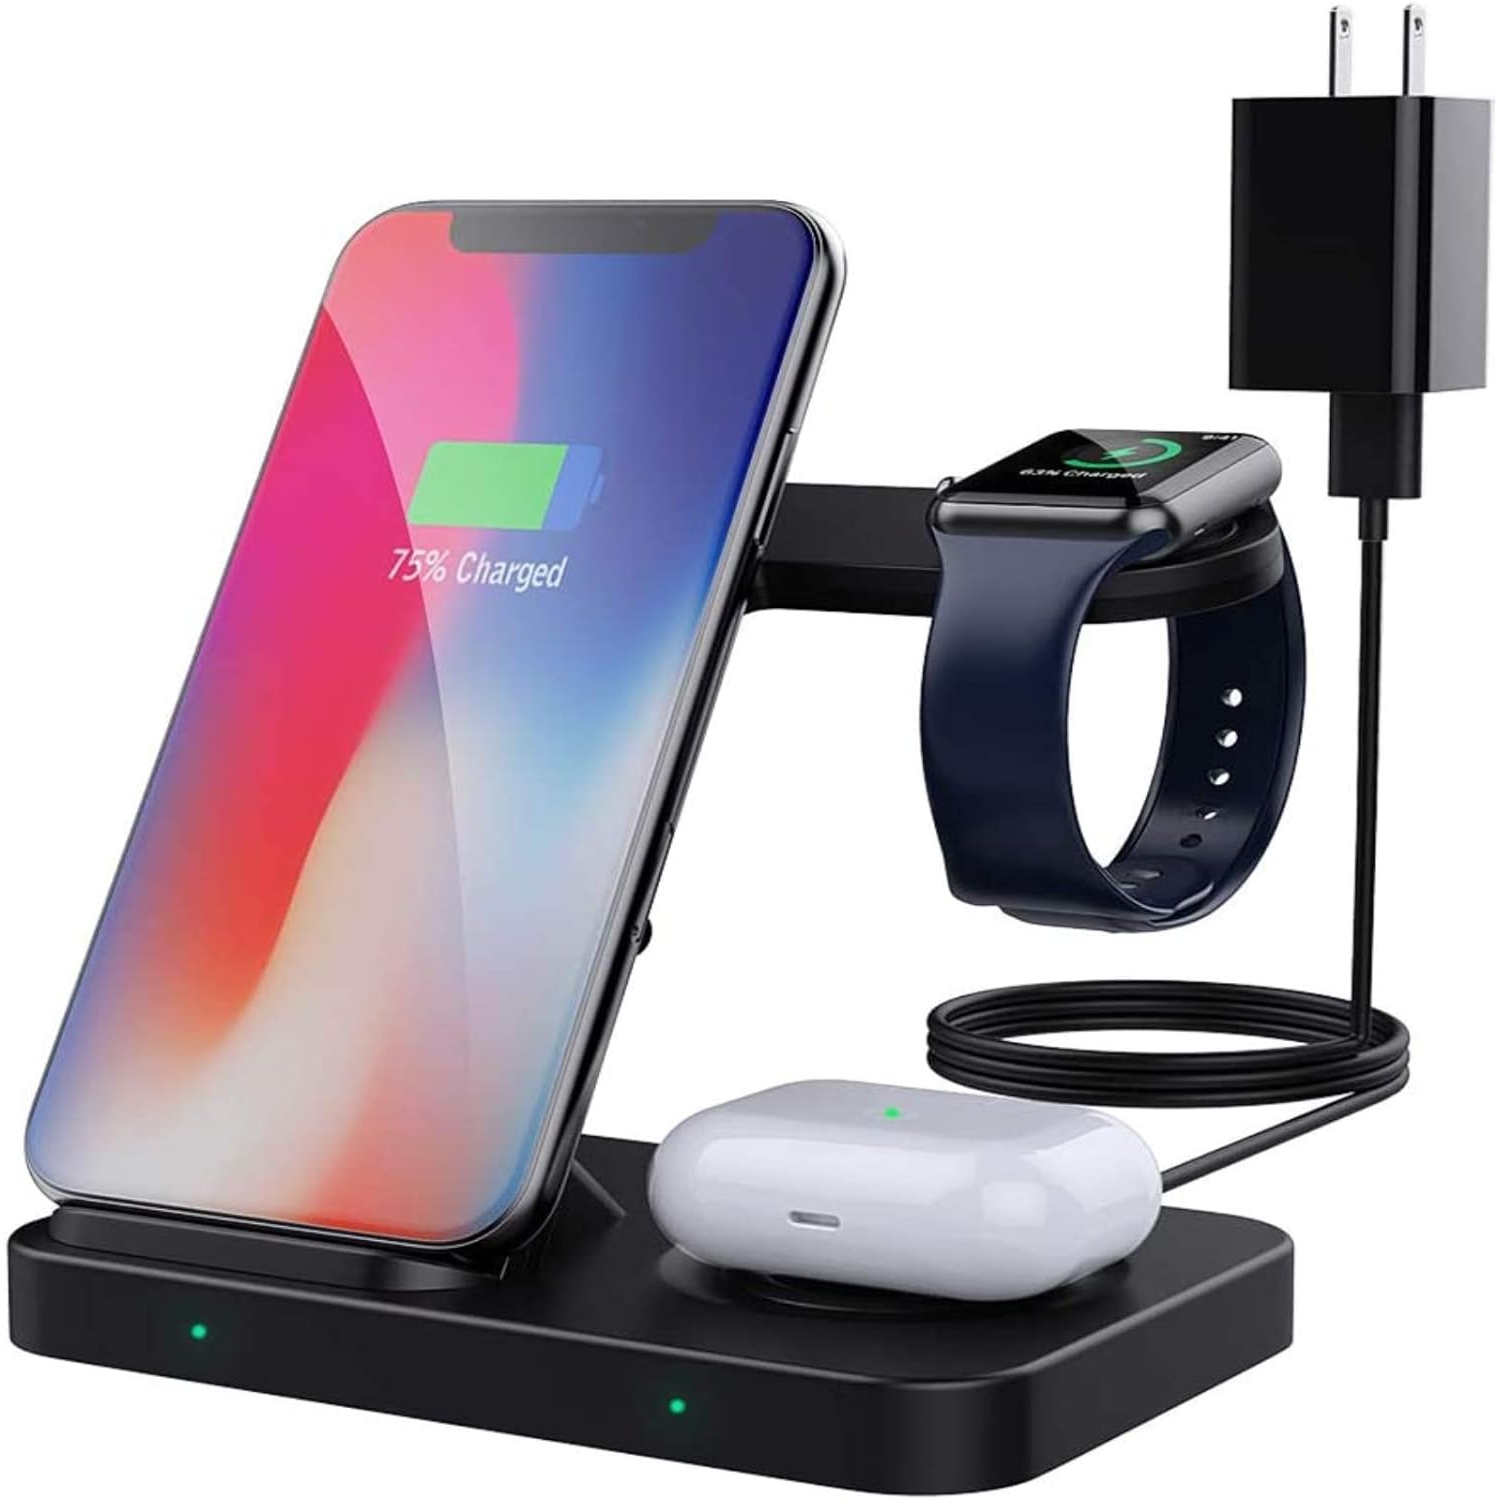 3 in 1 Wireless Charger Stand, 10W Fast Charging Dock Station Compatible Galaxy Watch 3/Active 2/1/Buds, iPhone